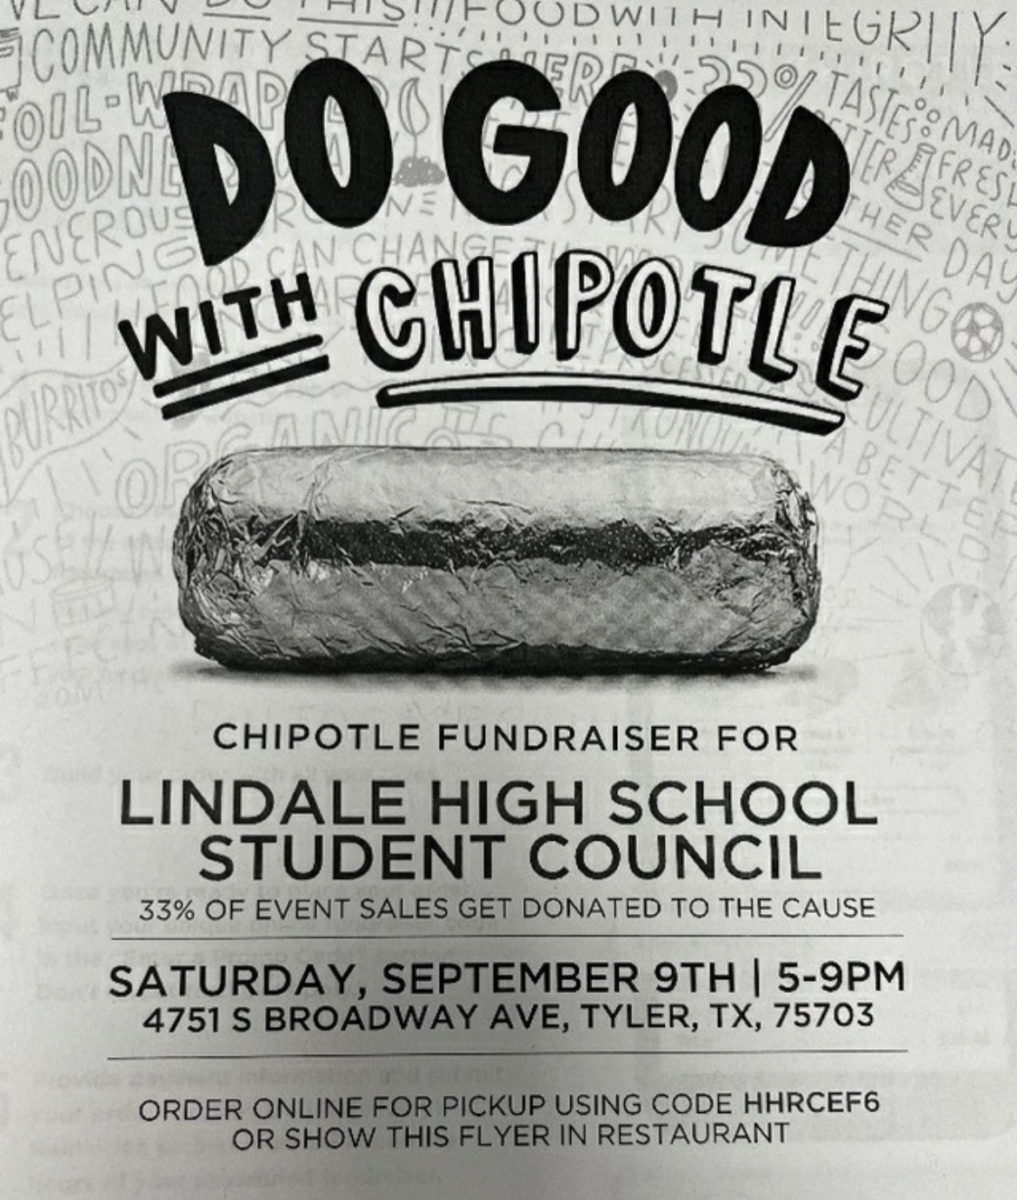 The+Chipotle+Fundraiser+will+take+place+at+4851+Broadway+Ave%2C+Tyler+TC%2C+75703.+33+percent+of+the+even+sales+will+get+donated+to+the+cause.+